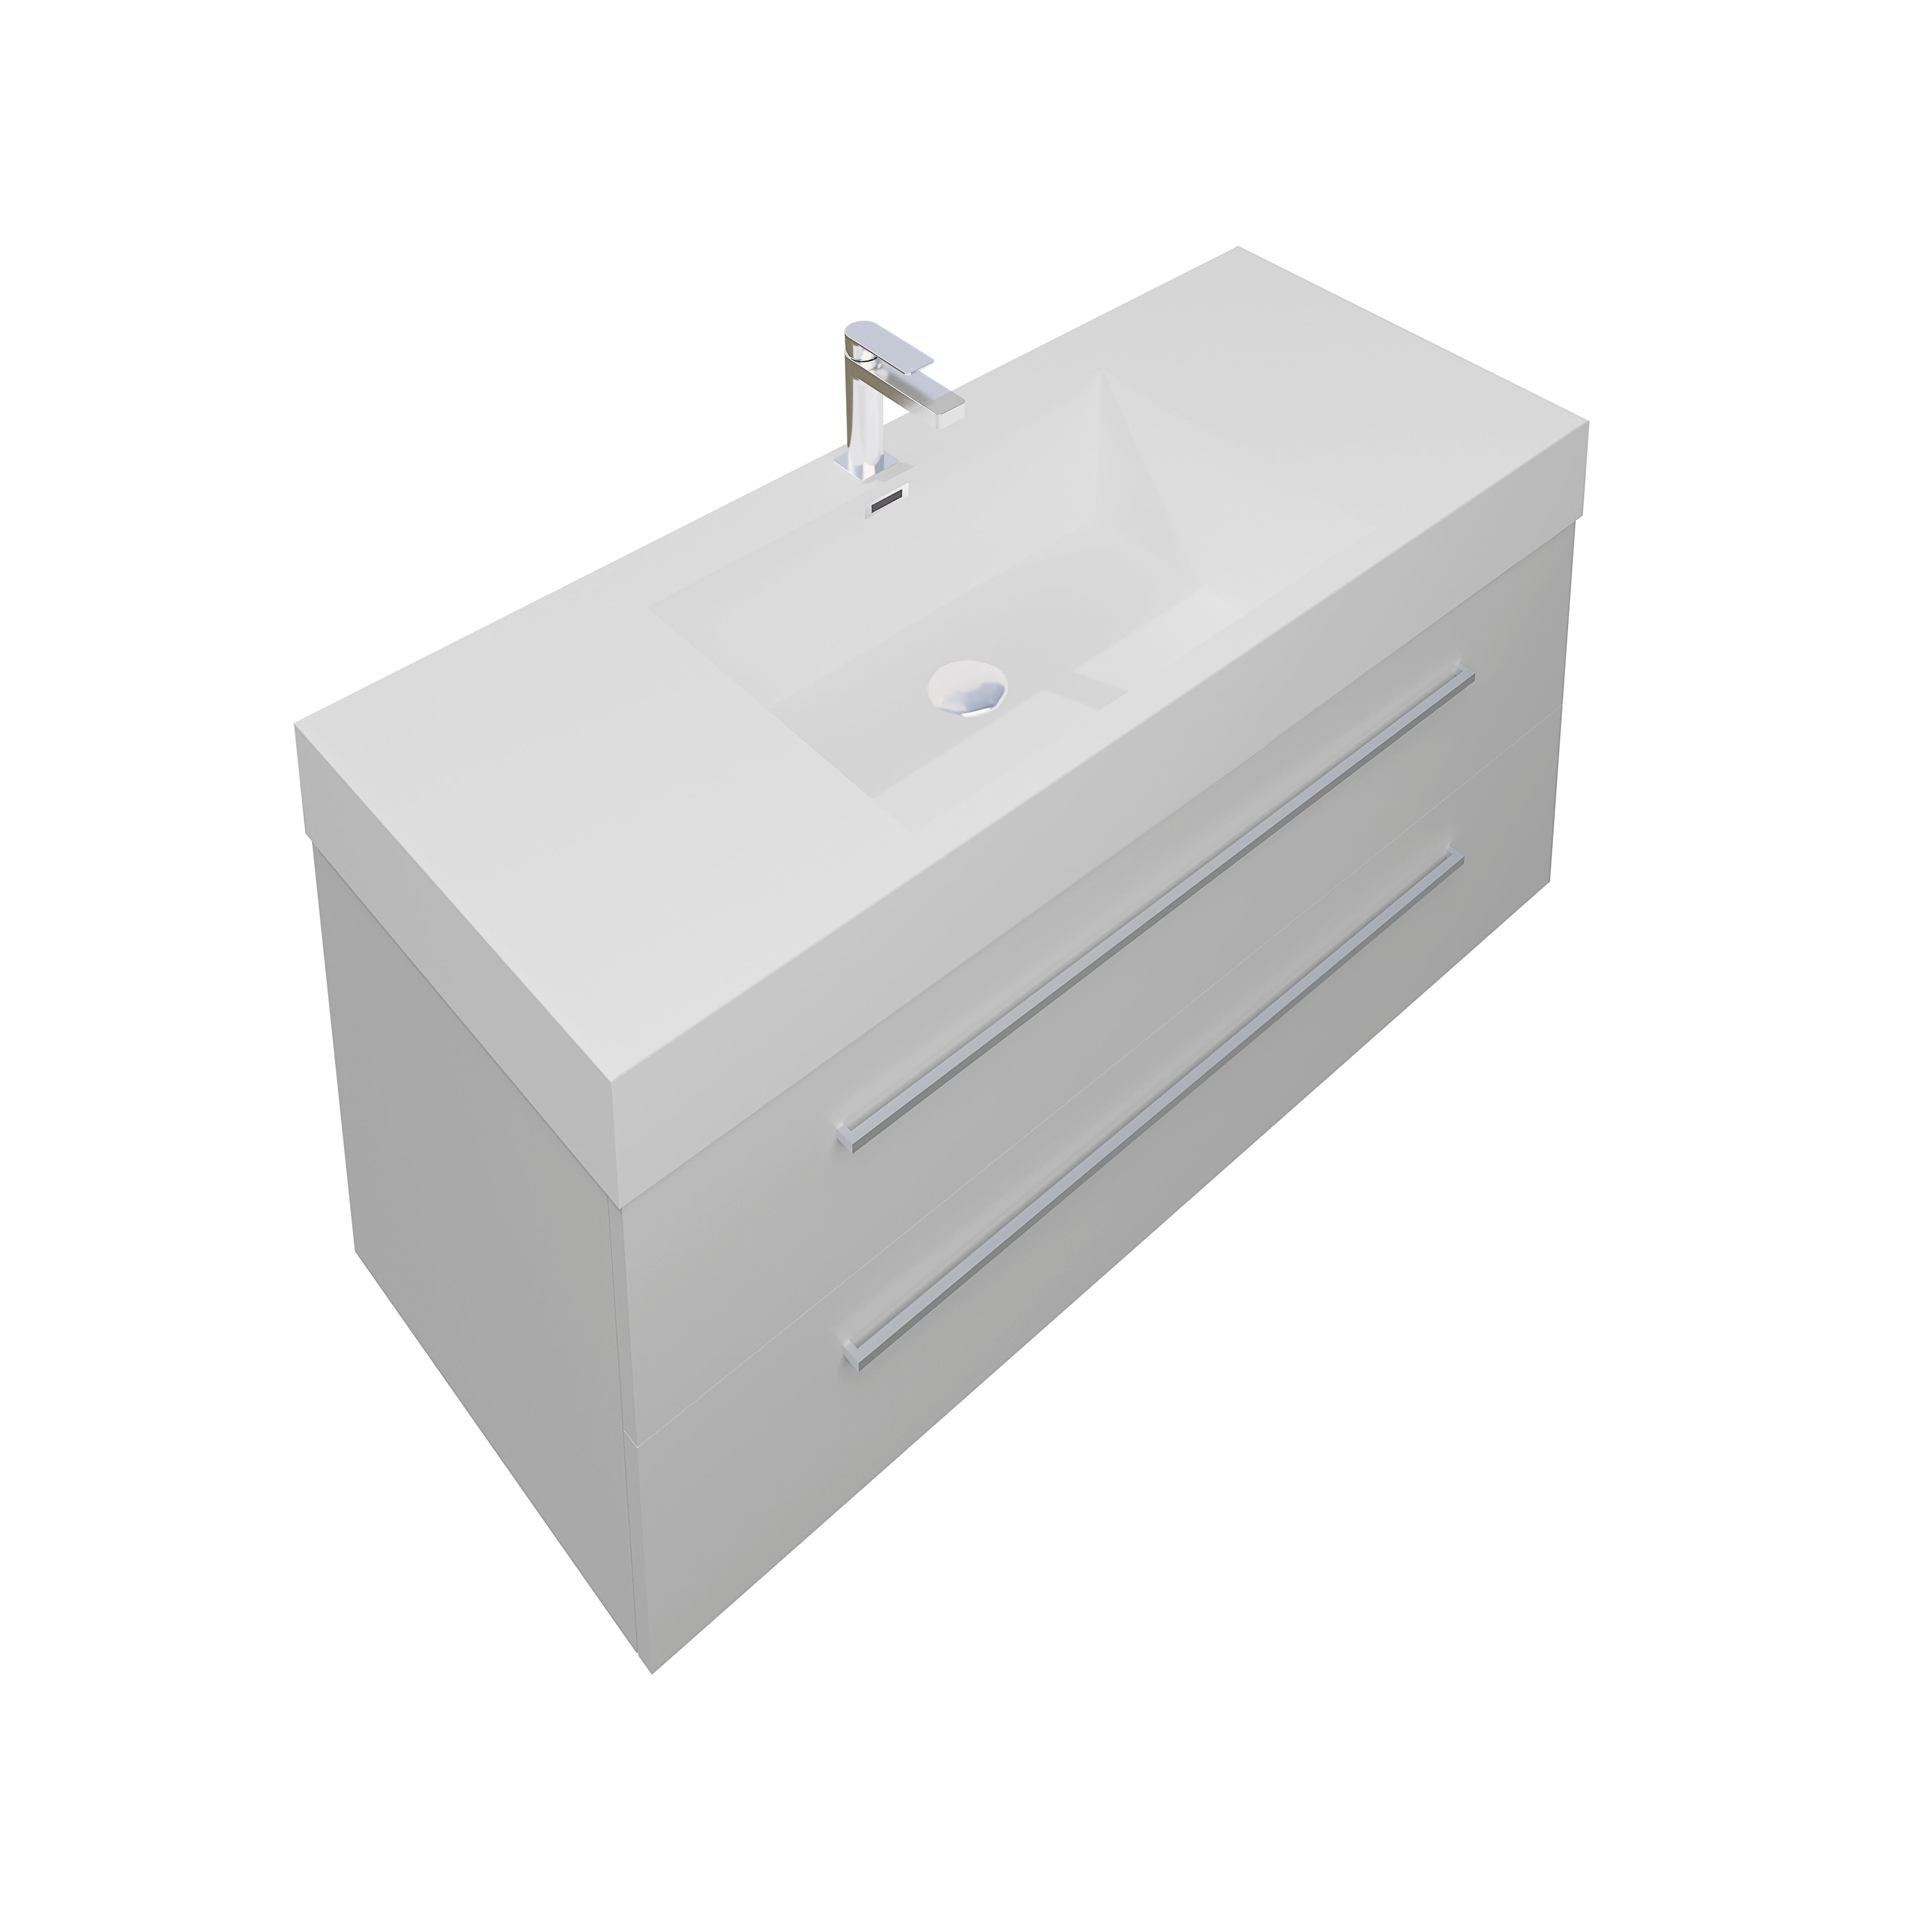 Maya 47.5 White High Gloss Cabinet, Square Cultured Marble Sink, Wall Mounted Modern Vanity Set